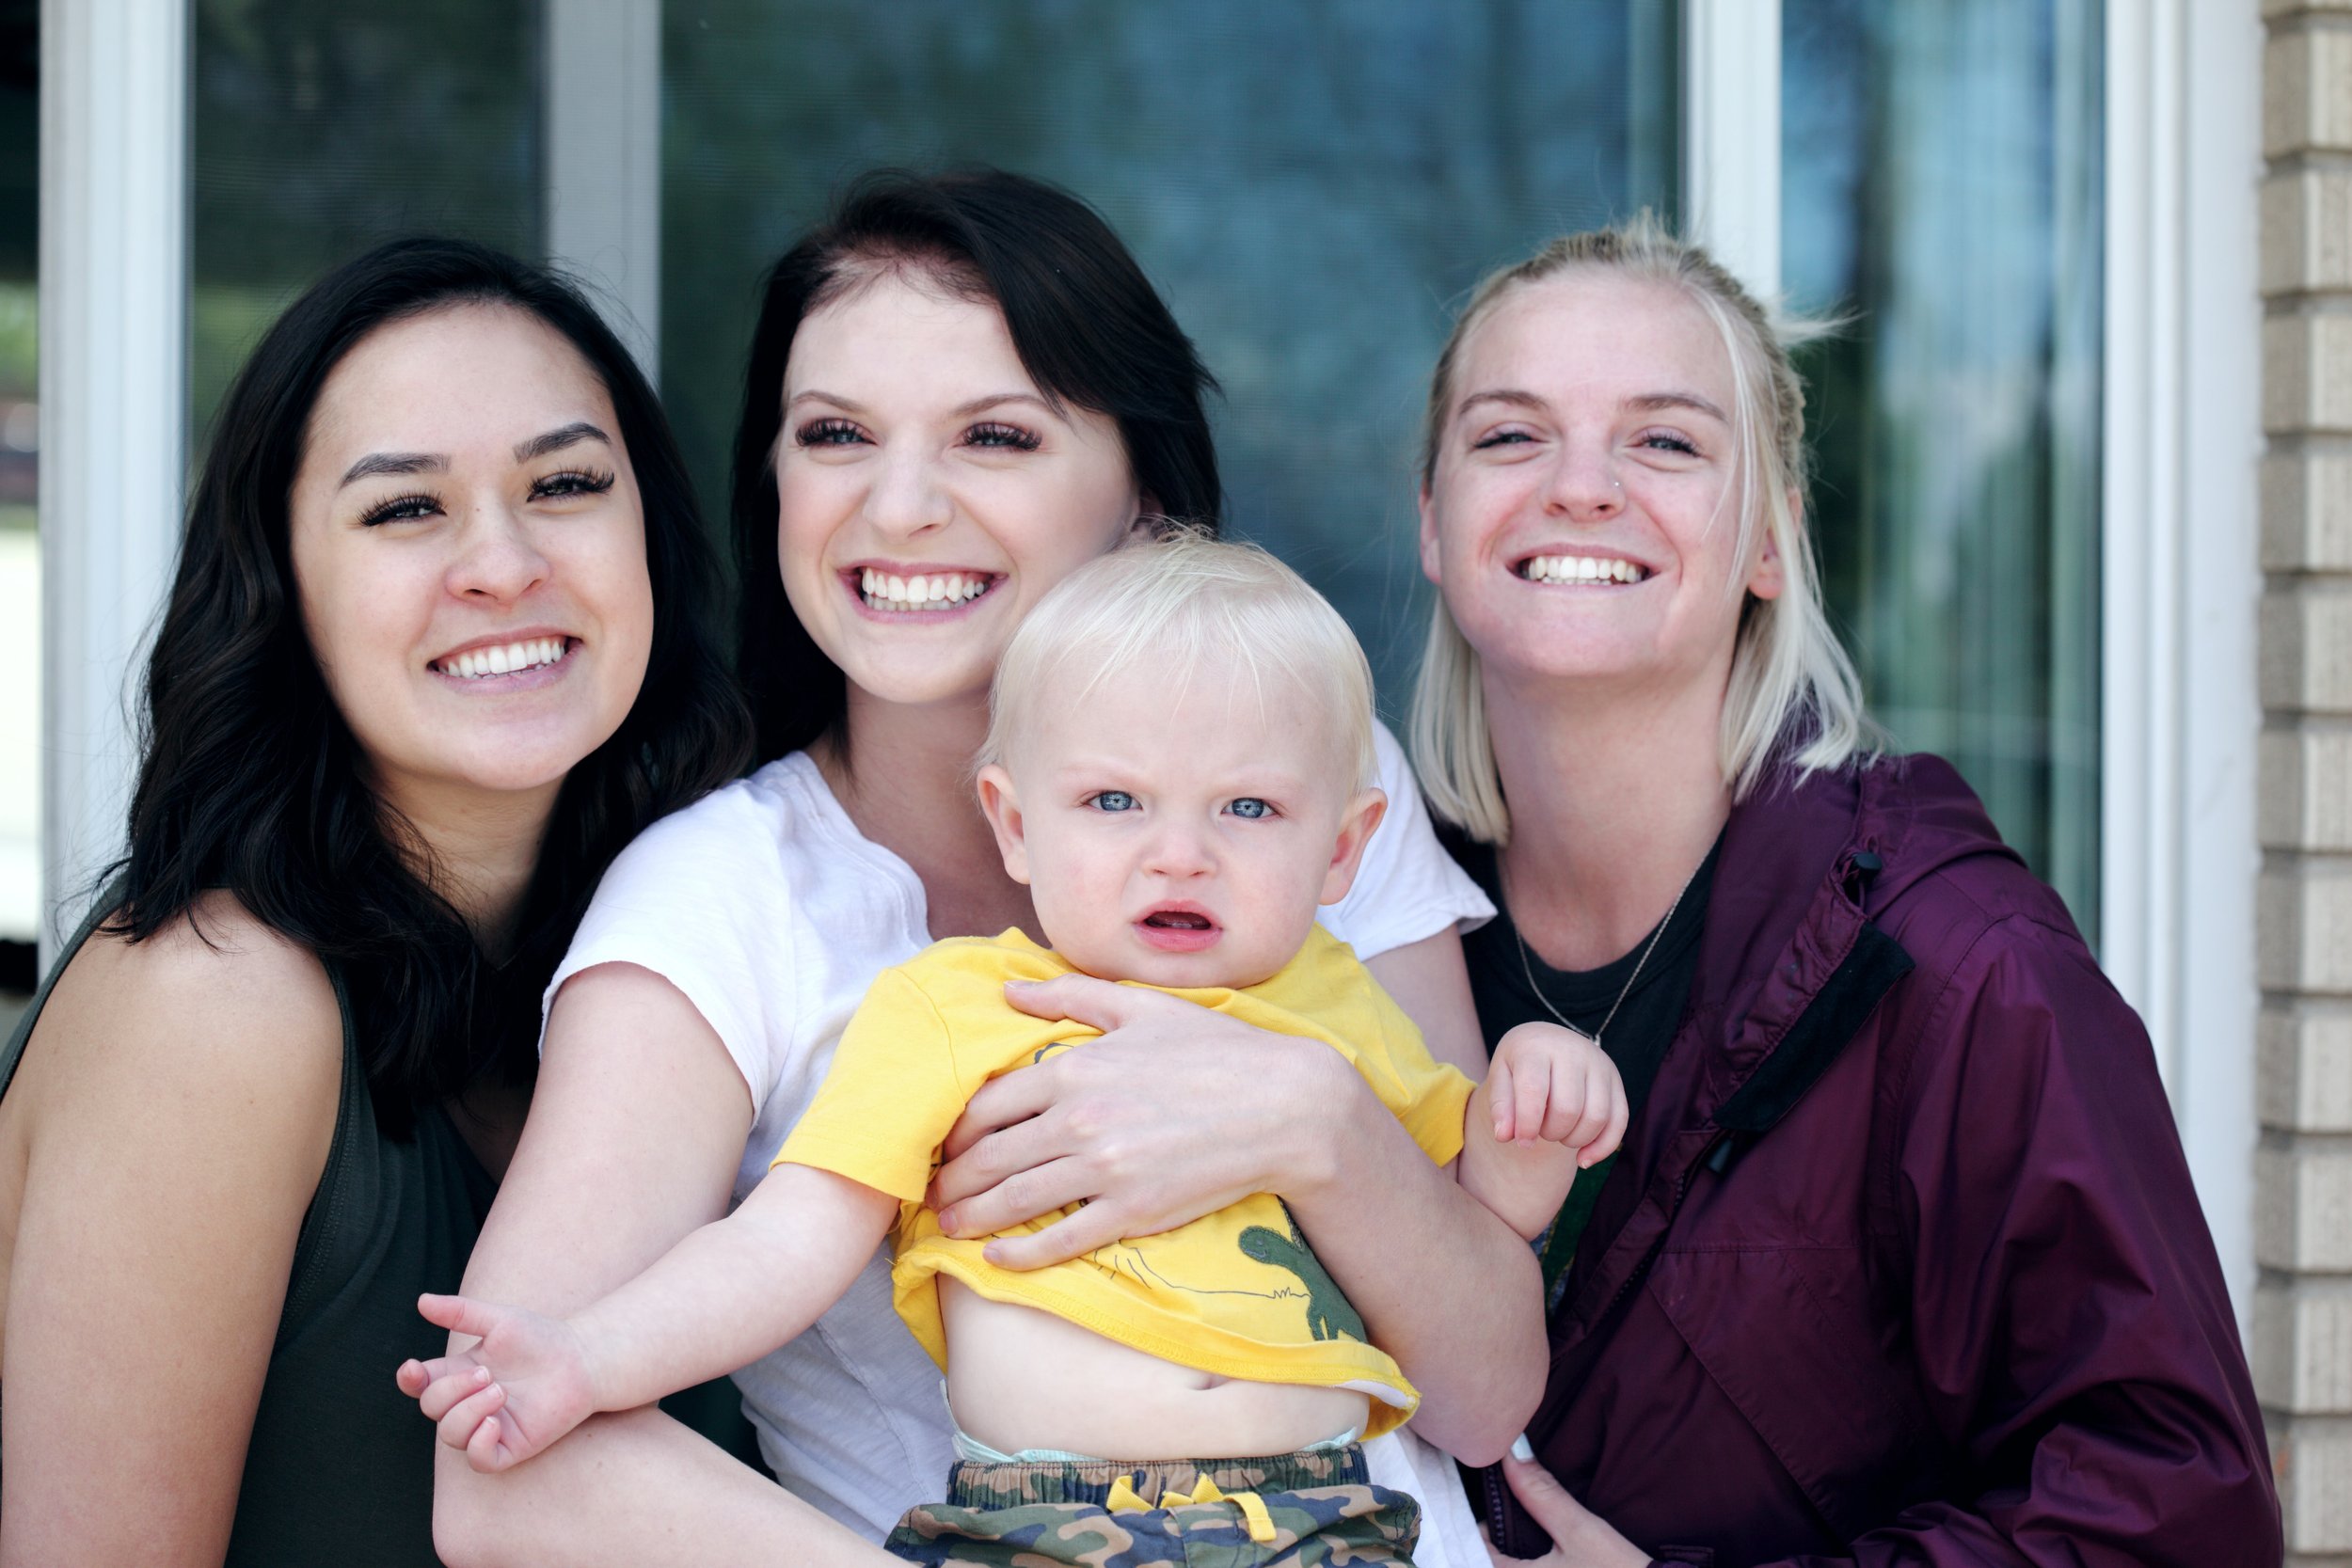  Three young female-presenting people smiling with a baby in an outdoor setting. The person on the left has black hair, the person in the center has black hair and is holding the baby. The person on the right has blonde hair. The baby is also blonde 